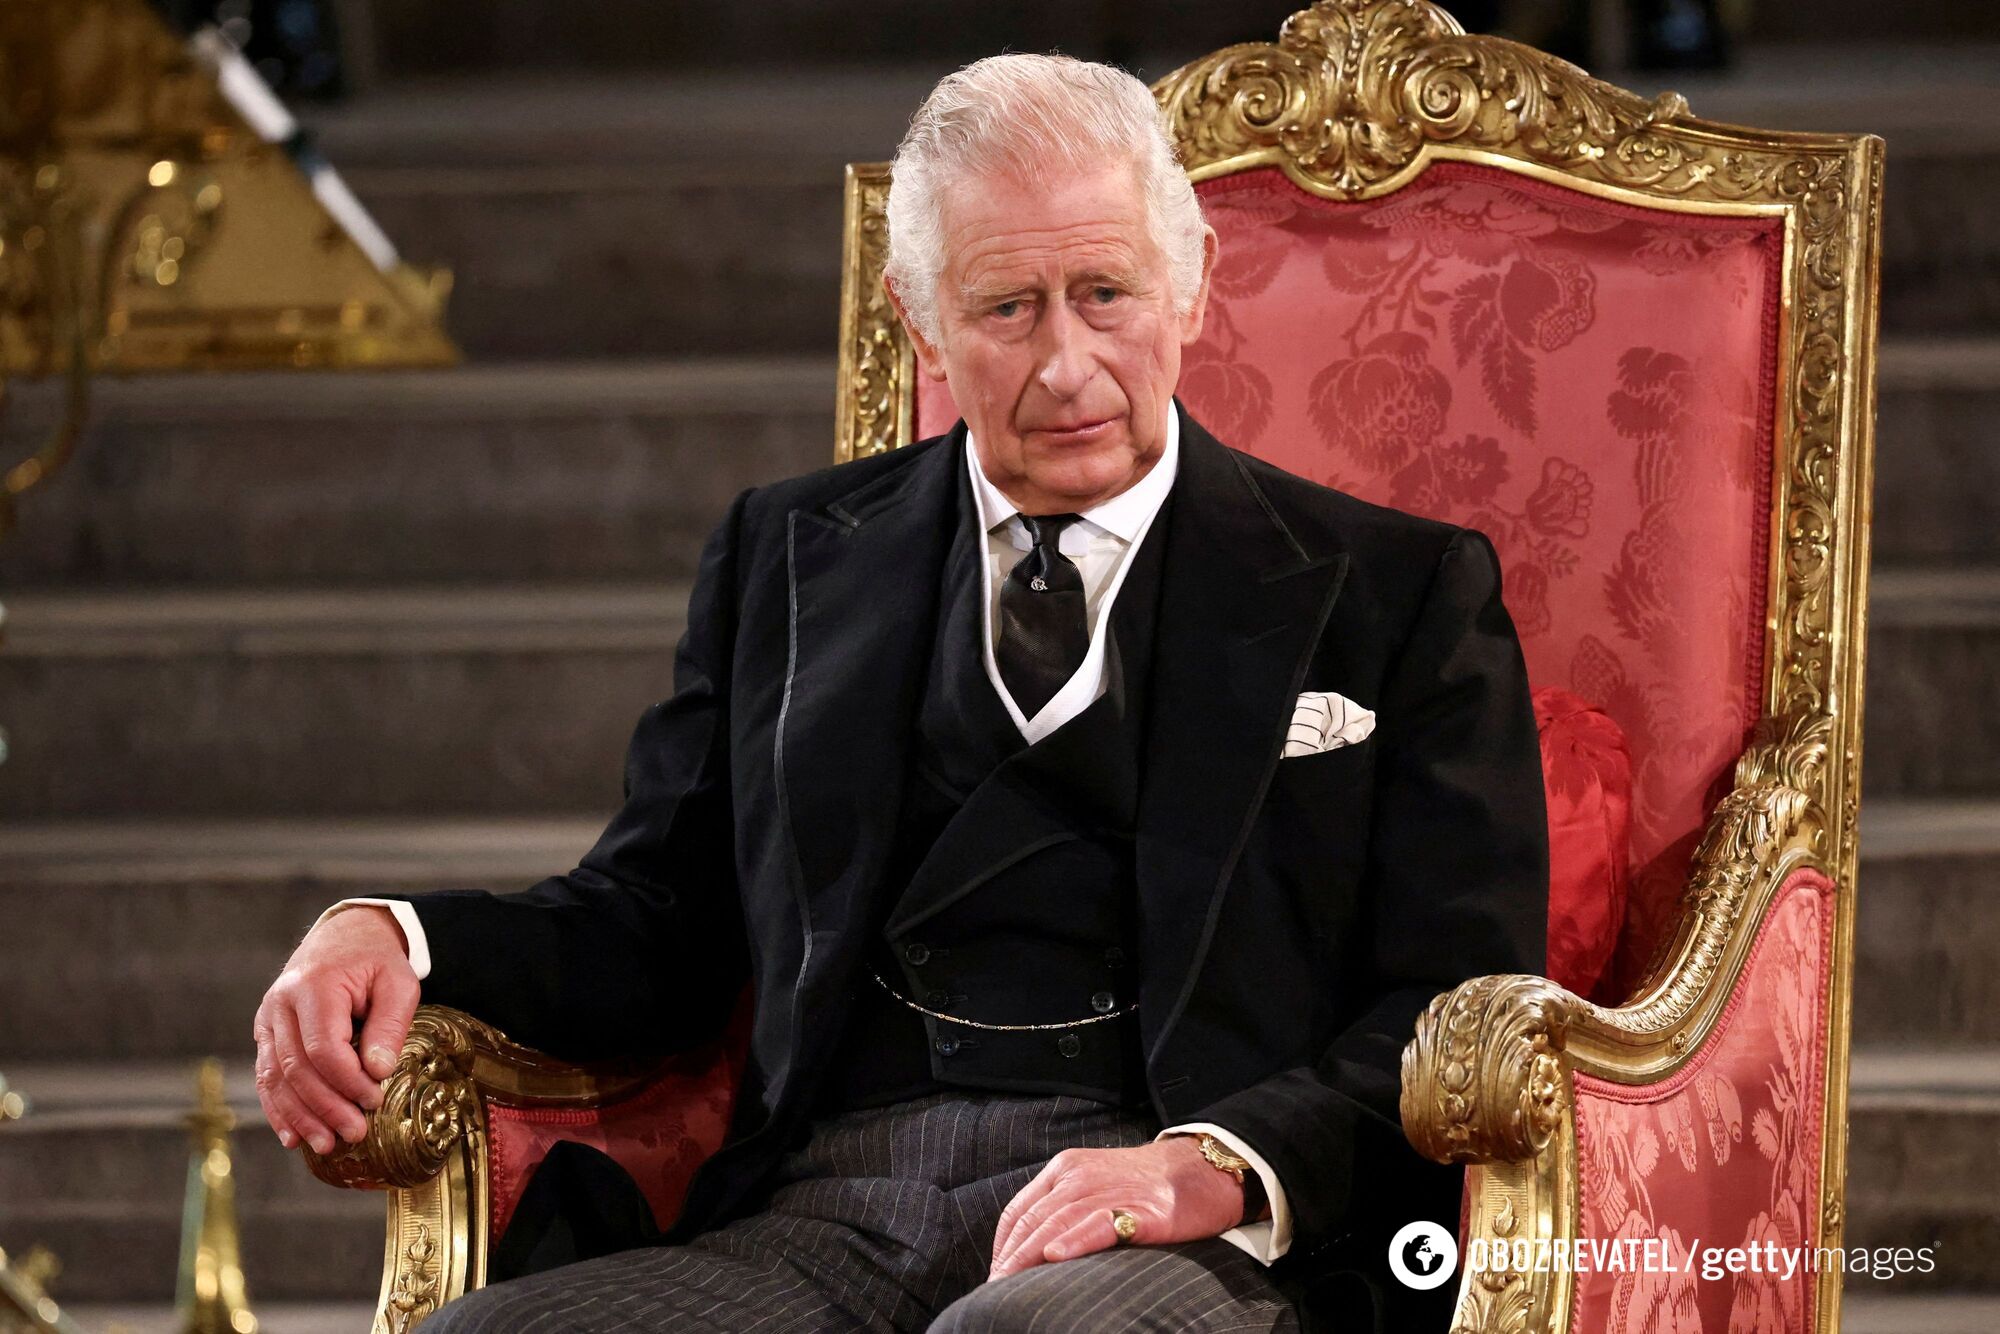 It became known why King Charles III revealed his diagnosis and Kate Middleton keeps it a secret